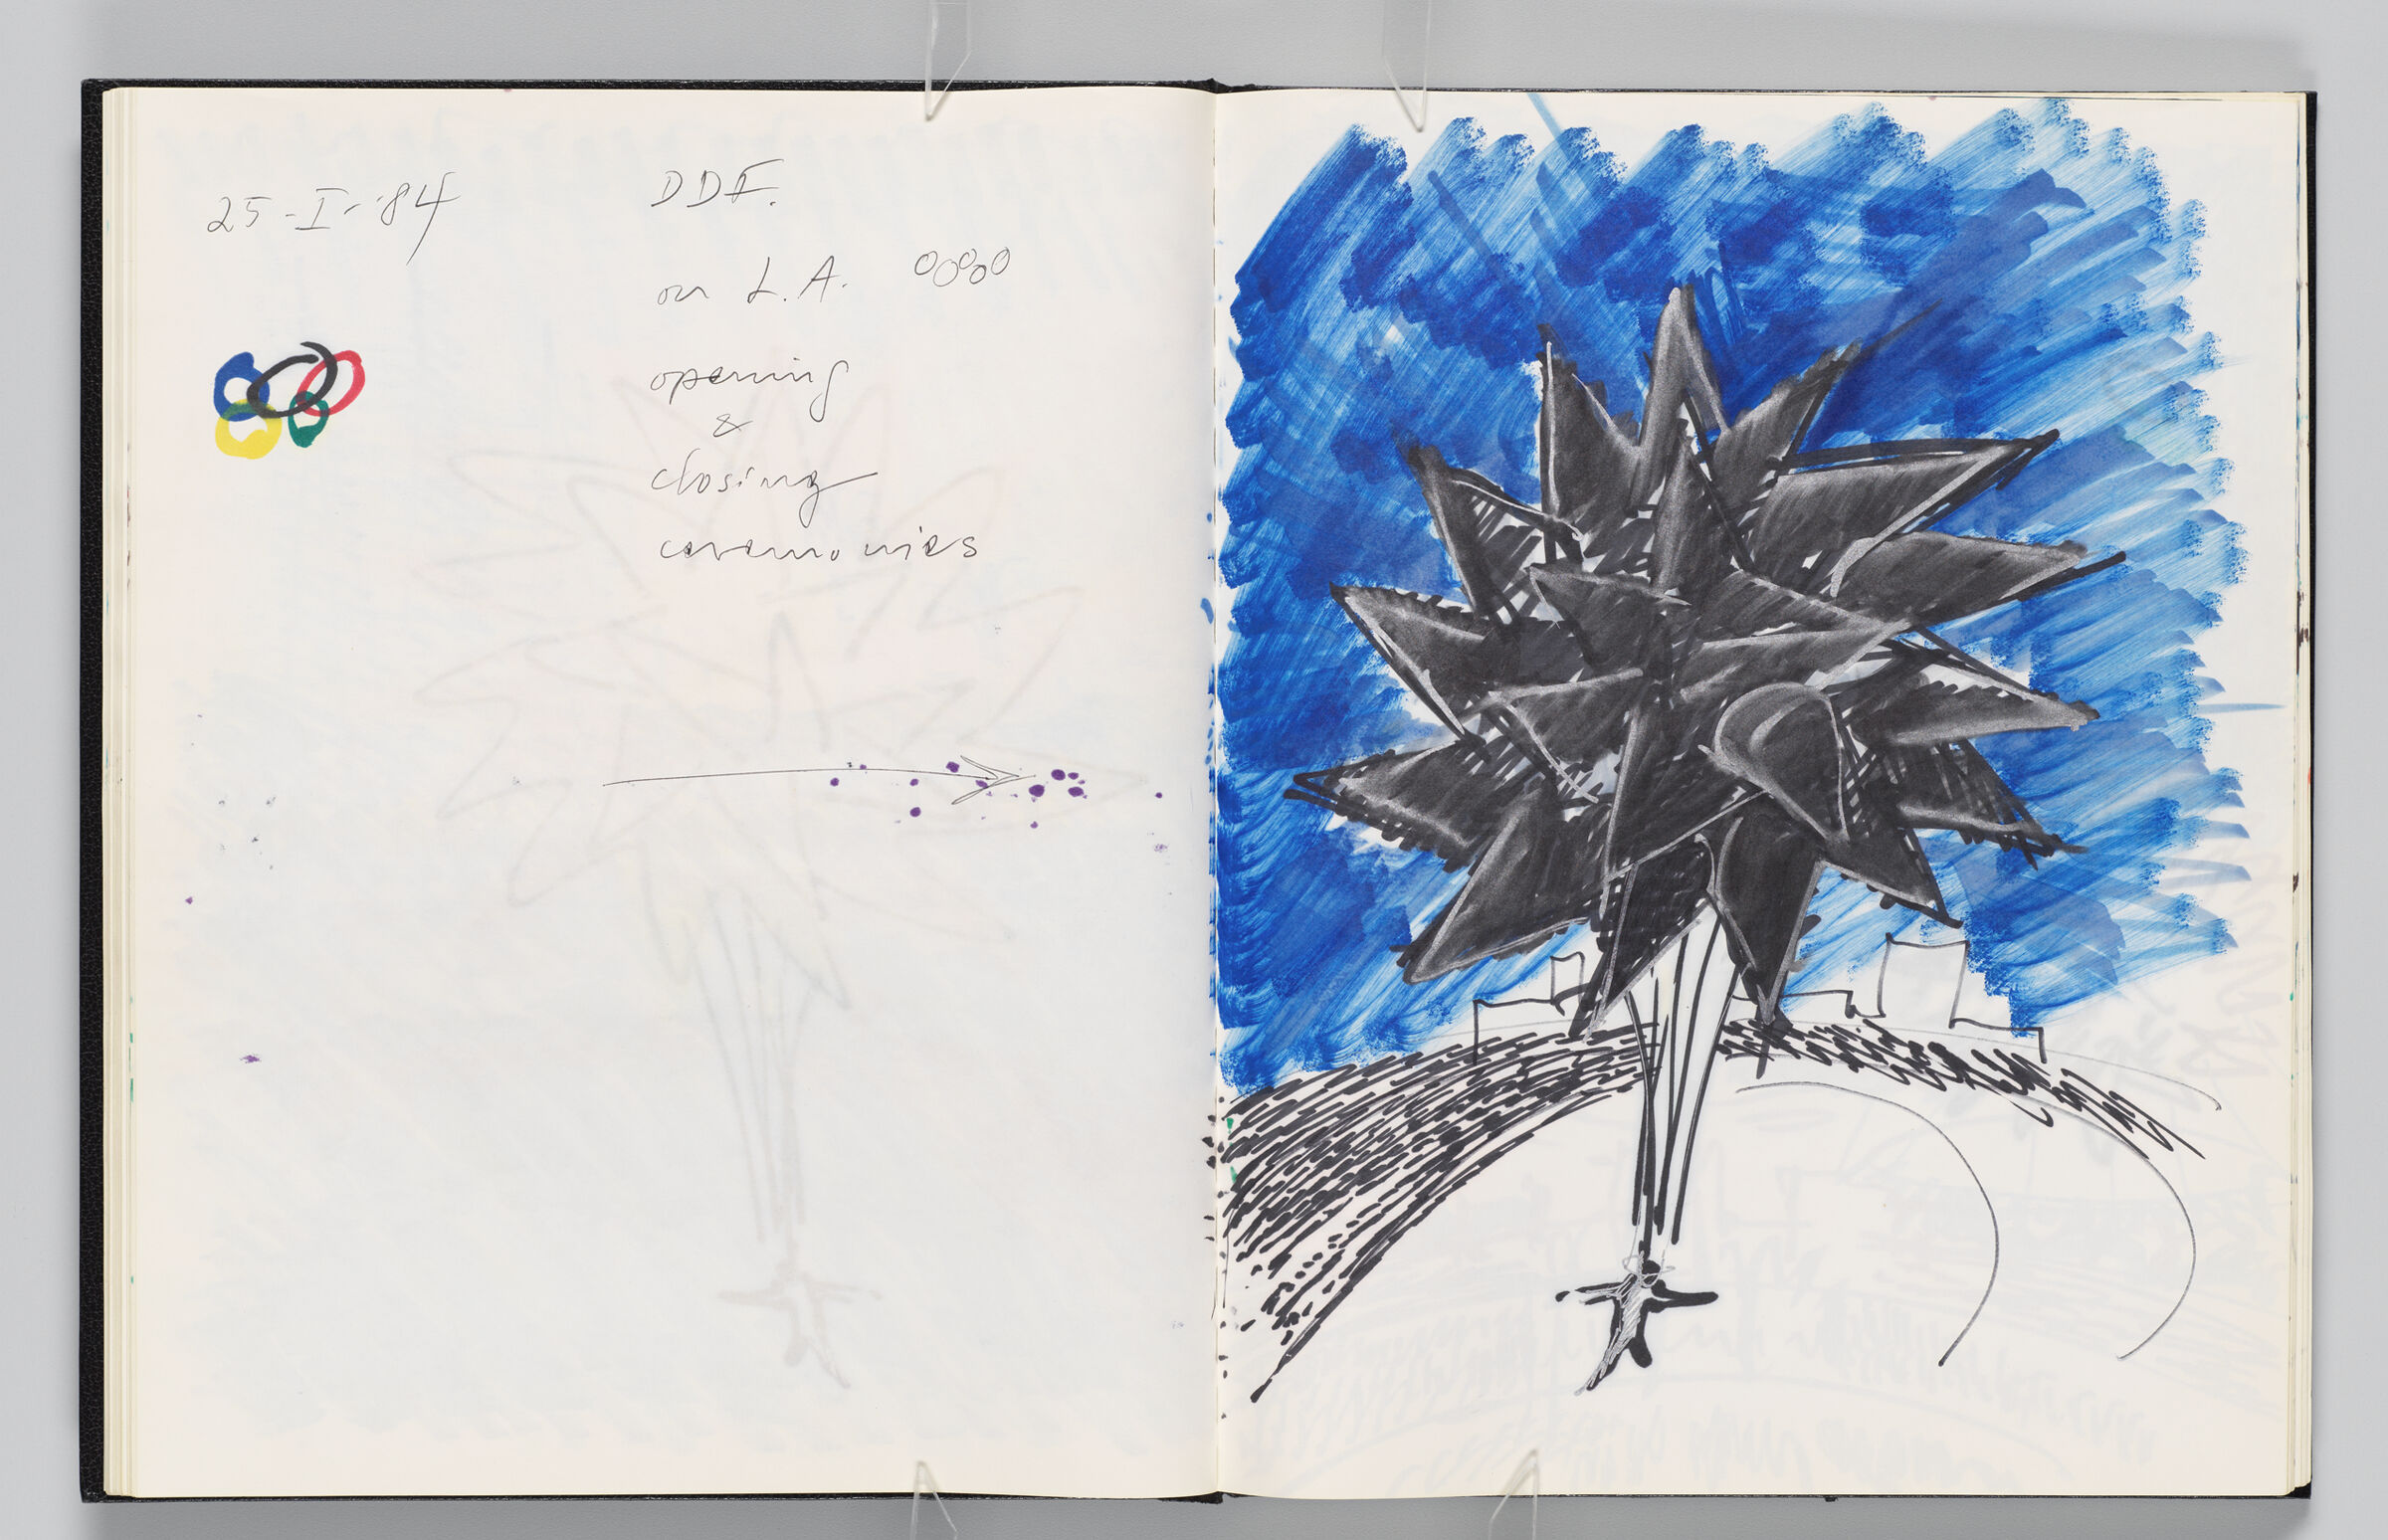 Untitled (Notes And Olympic Rings With Color Transfer, Left Page); Untitled (Inflatable And Figure, Right Page)